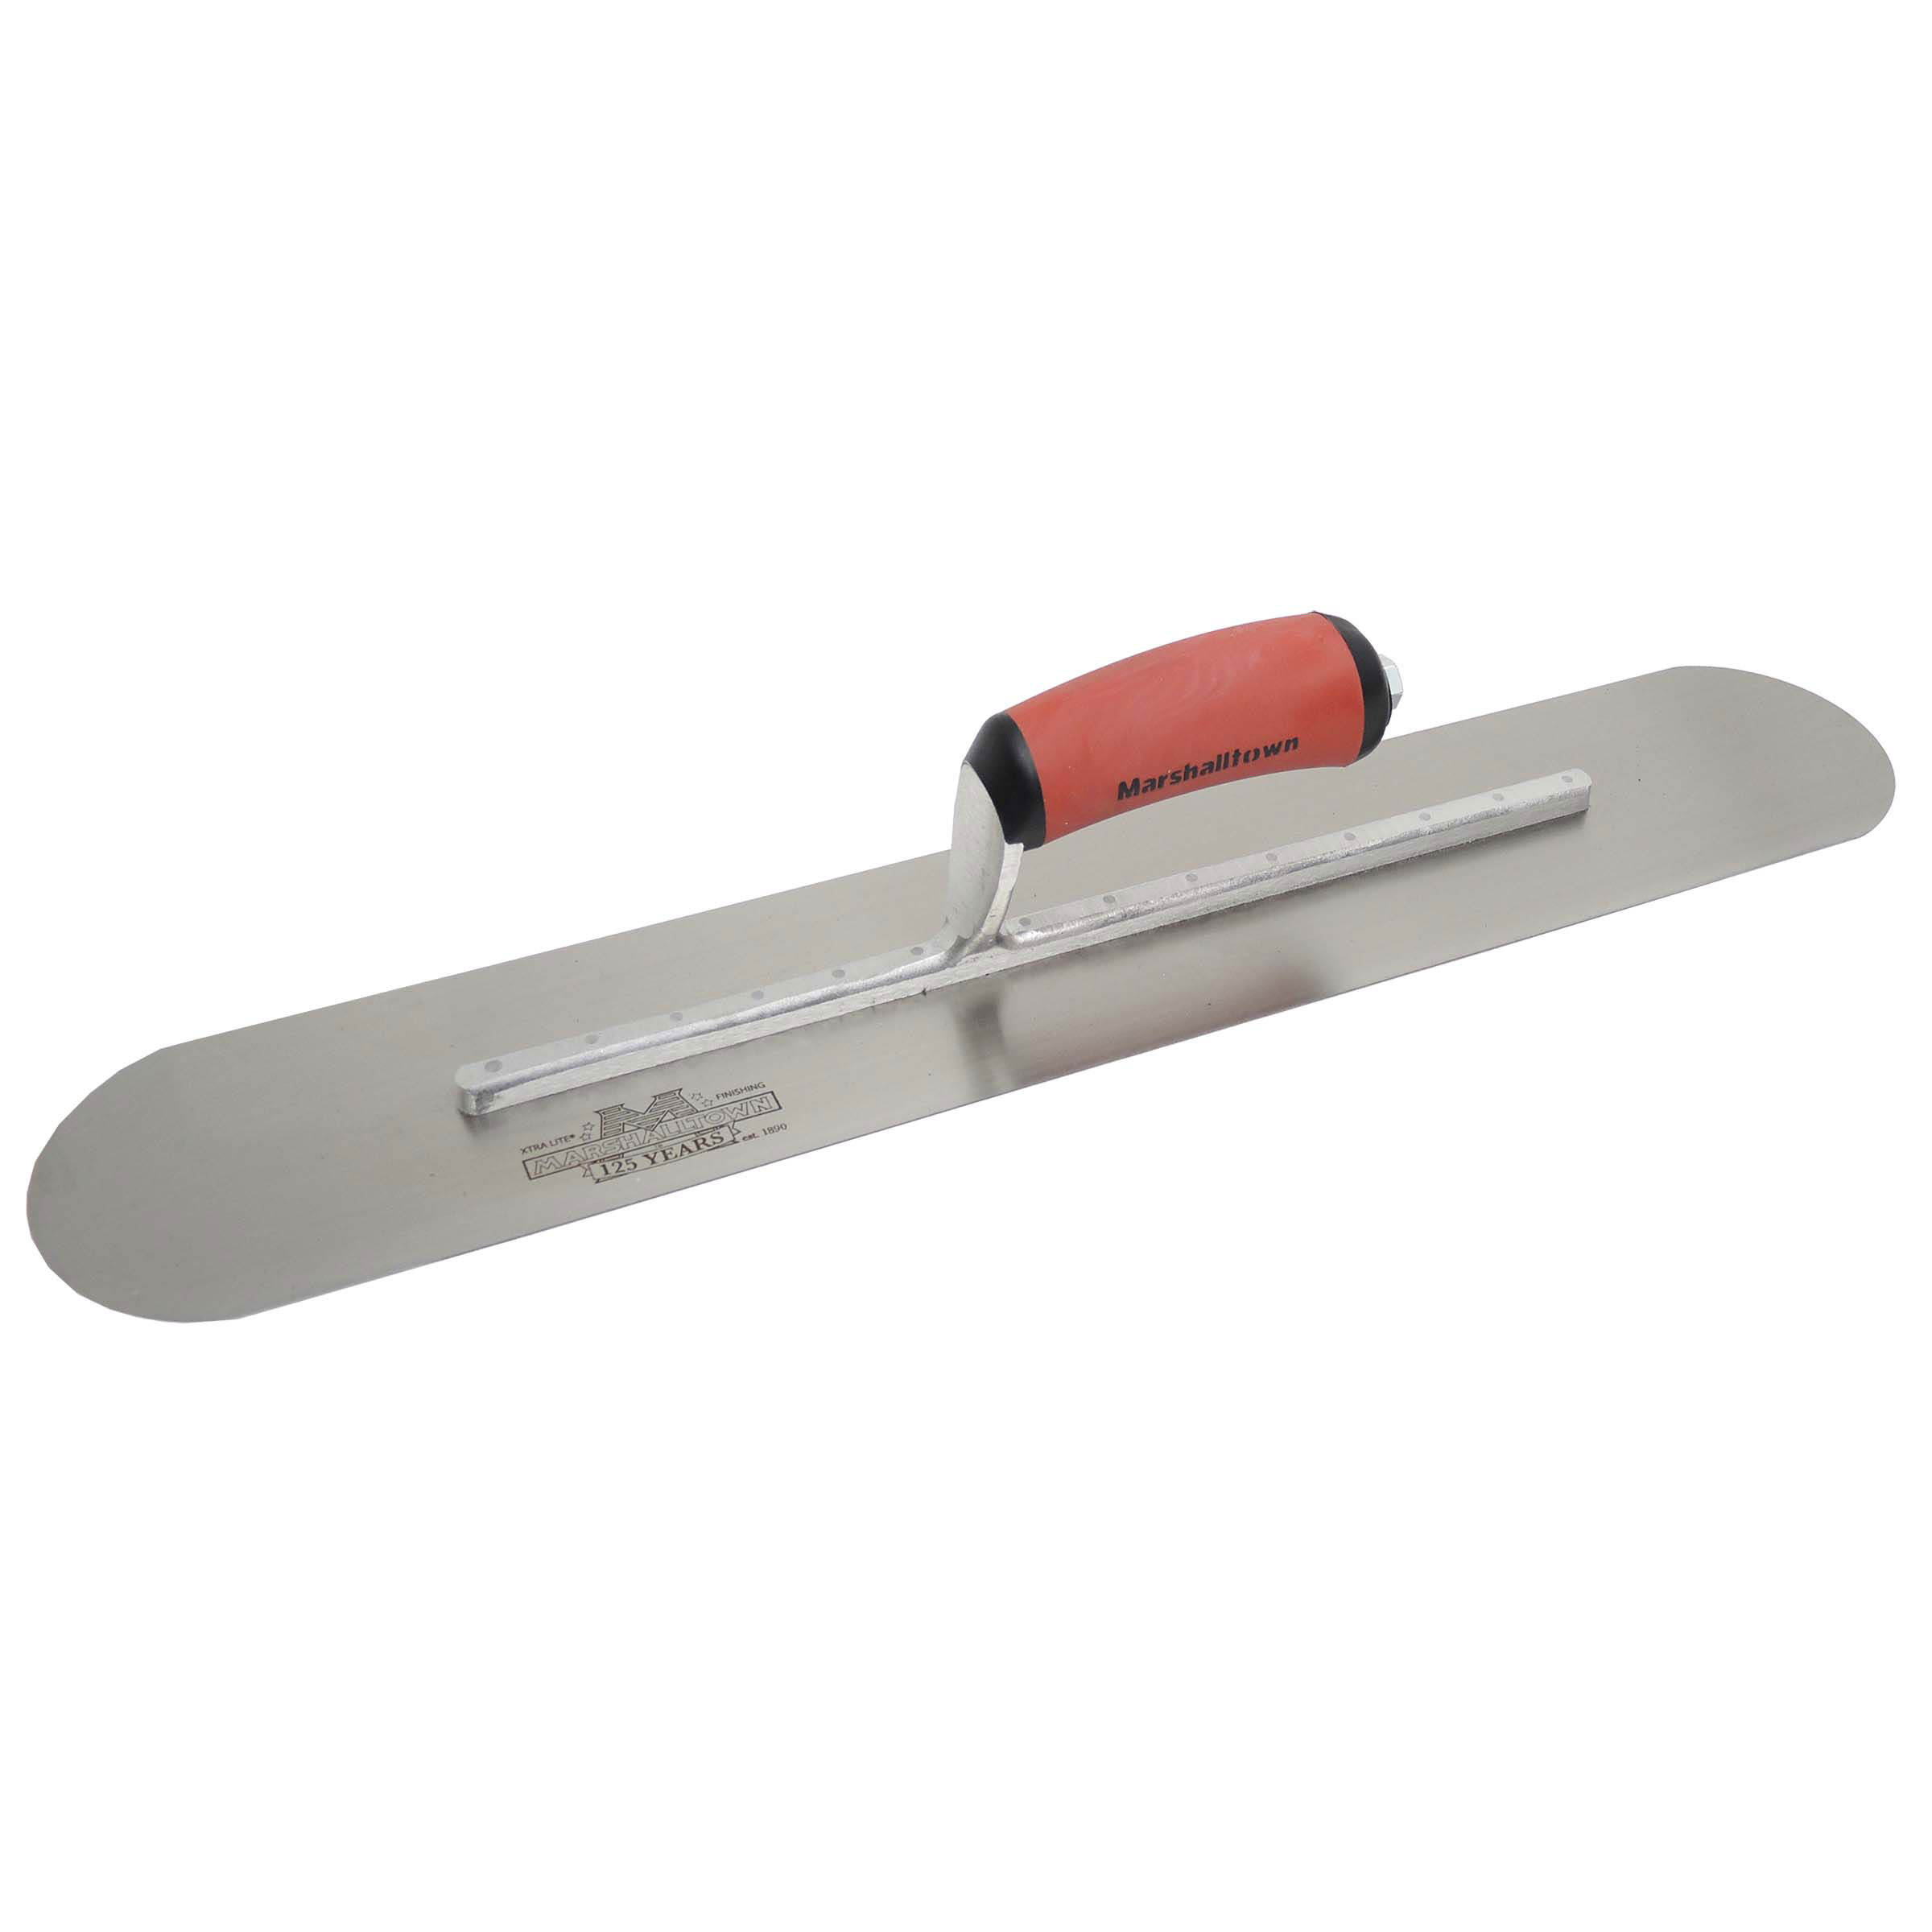 Marshalltown SP22D 22in x 4in Pool Trowel with DuraSoft Handle SP22D